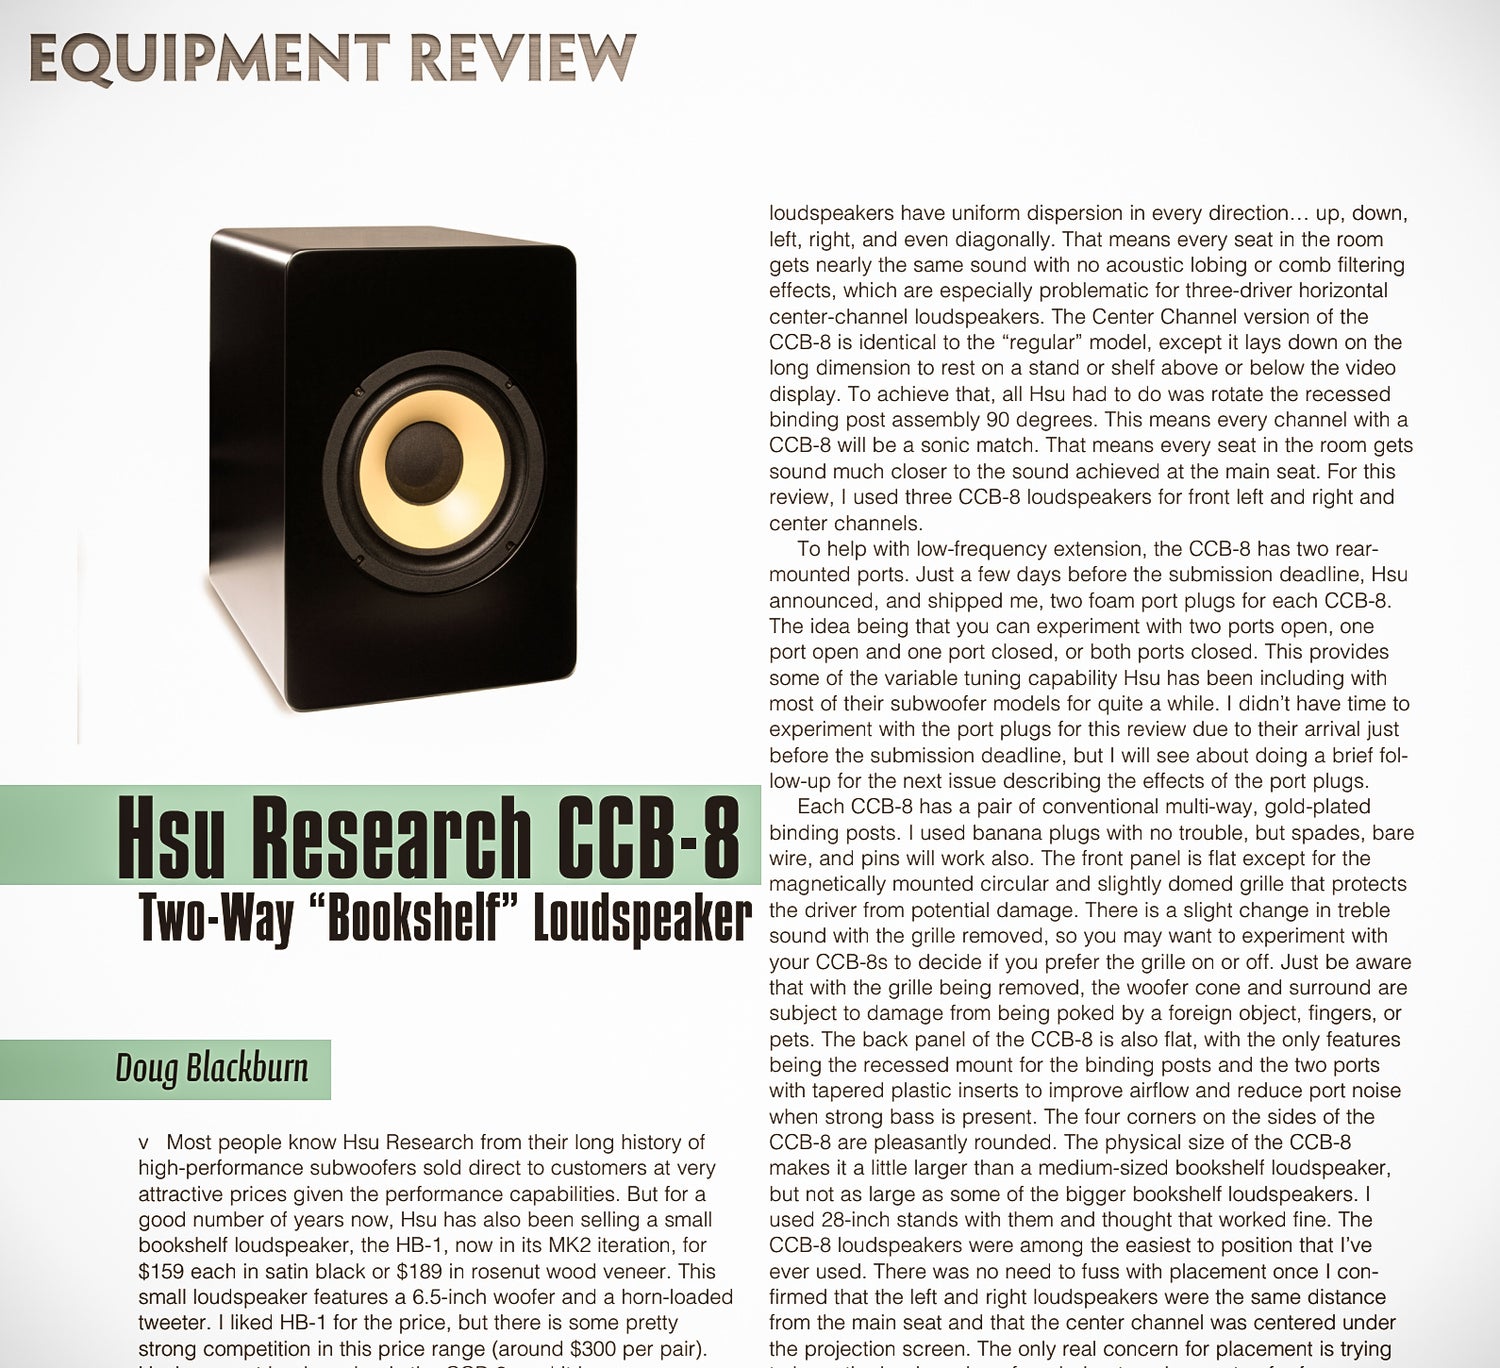 Widescreen Review 2017 HSU CCB-8 - Lot of Performance for a Modest Amount of Money